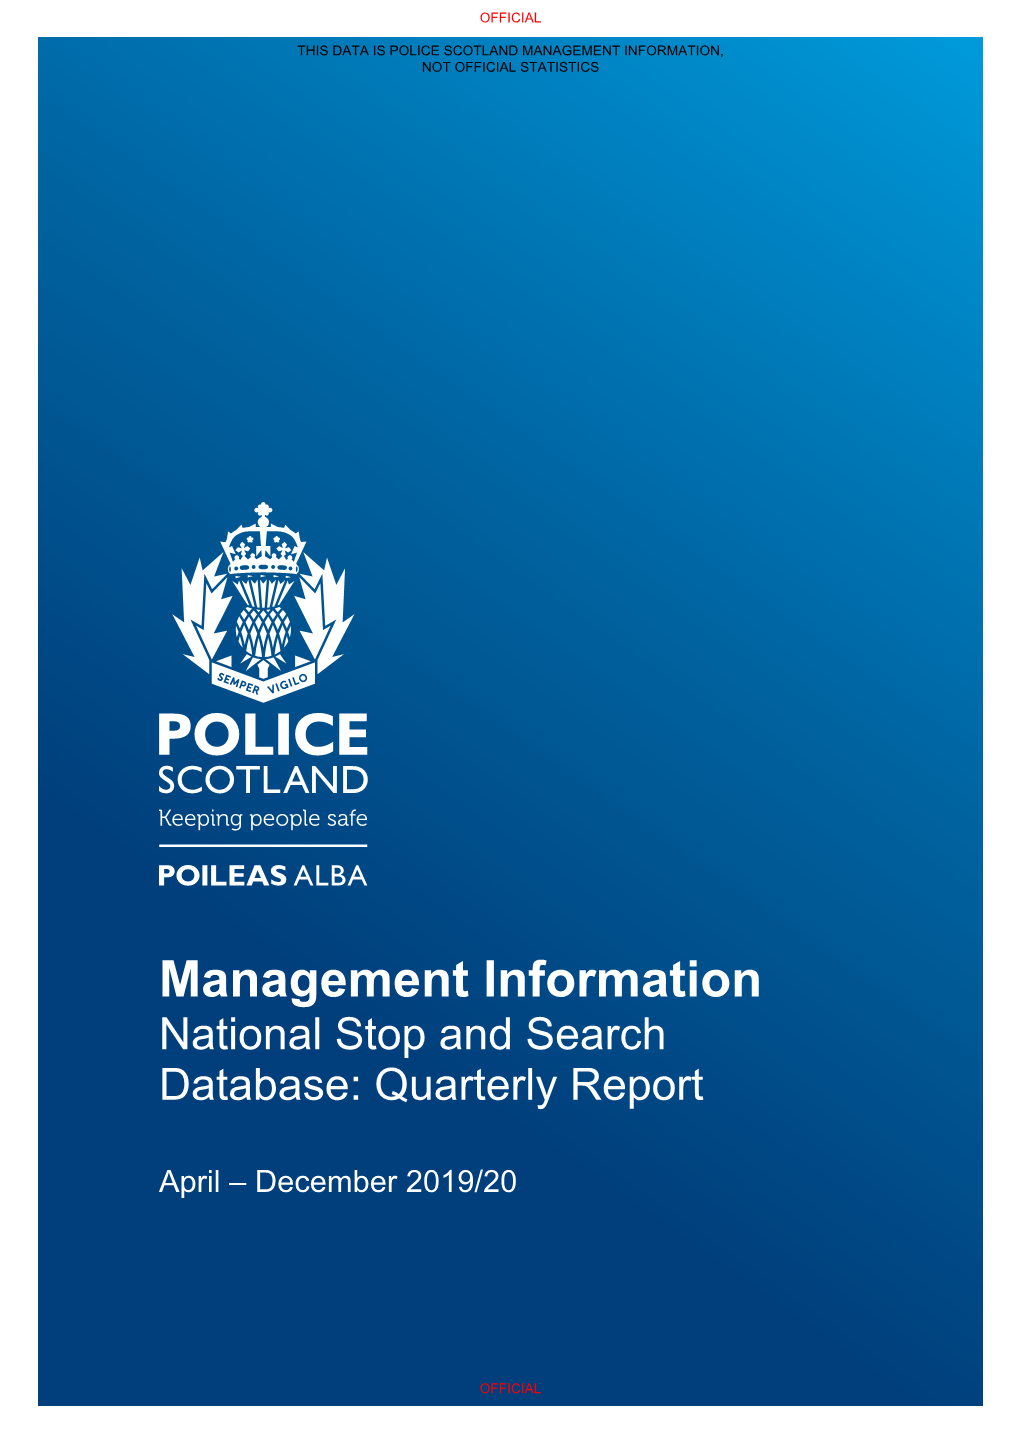 Management Information National Stop and Search Database: Quarterly Report